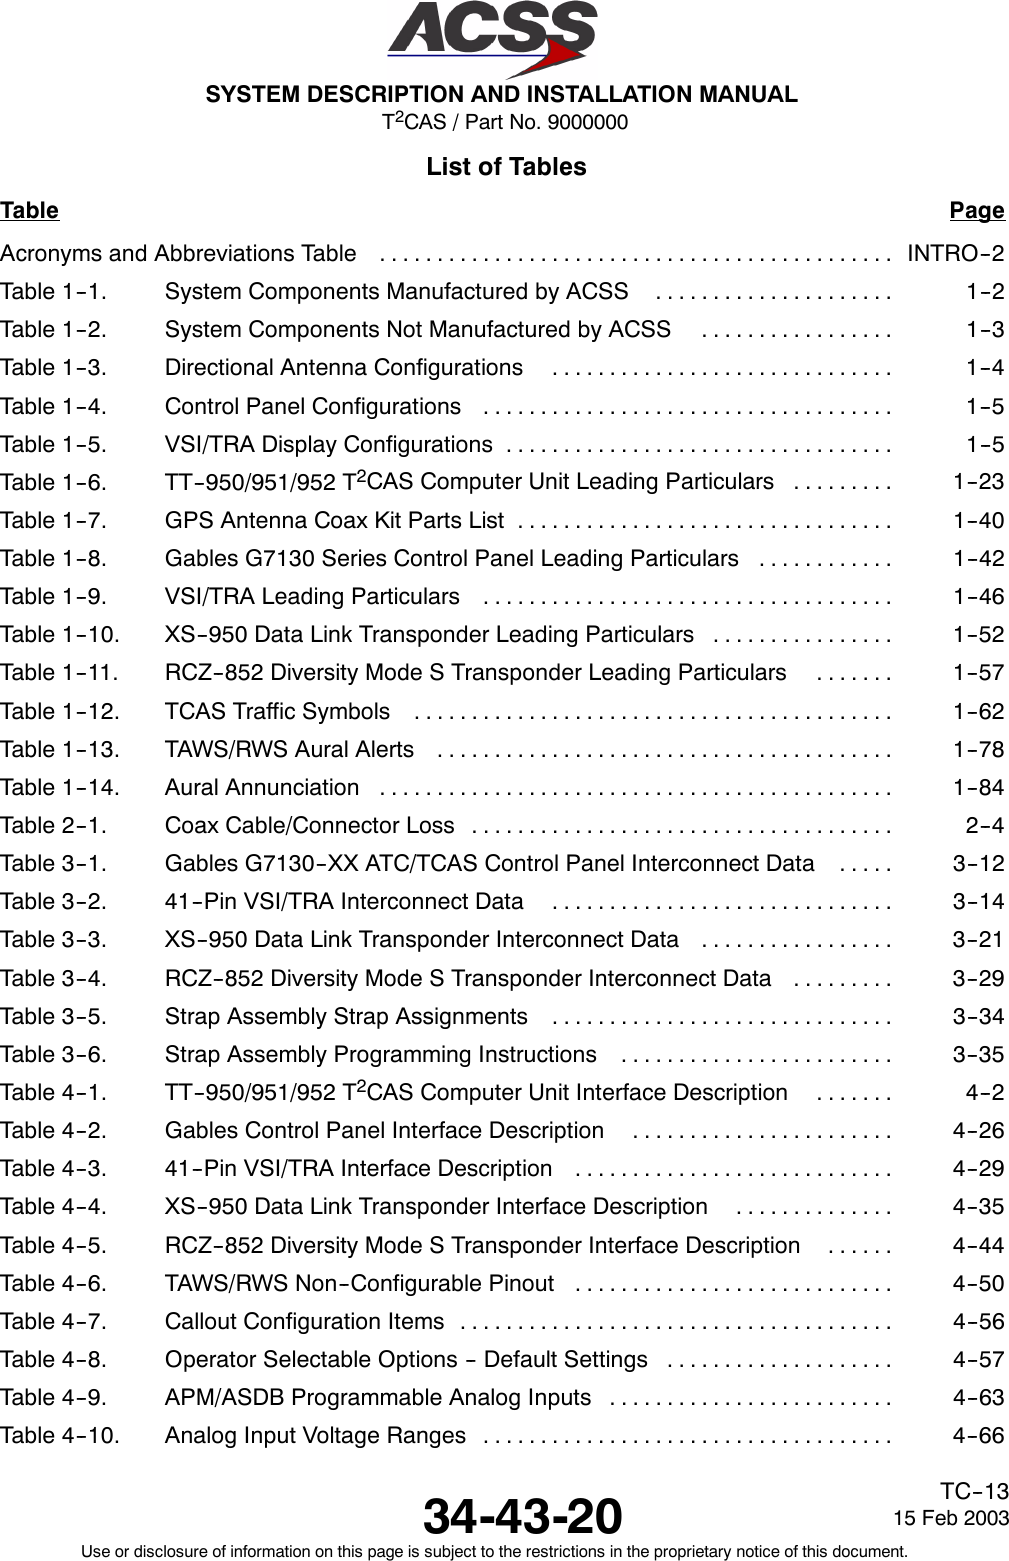 T2CAS / Part No. 9000000SYSTEM DESCRIPTION AND INSTALLATION MANUAL34-43-20 15 Feb 2003Use or disclosure of information on this page is subject to the restrictions in the proprietary notice of this document.TC--13List of TablesTable PageAcronyms and Abbreviations Table INTRO--2.............................................Table 1--1. System Components Manufactured by ACSS 1--2.....................Table 1--2. System Components Not Manufactured by ACSS 1--3.................Table 1--3. Directional Antenna Configurations 1--4..............................Table 1--4. Control Panel Configurations 1--5....................................Table 1--5. VSI/TRA Display Configurations 1--5..................................Table 1--6. TT--950/951/952 T2CAS Computer Unit Leading Particulars 1--23.........Table 1--7. GPS Antenna Coax Kit Parts List 1--40.................................Table 1--8. Gables G7130 Series Control Panel Leading Particulars 1--42............Table 1--9. VSI/TRA Leading Particulars 1--46....................................Table 1--10. XS--950 Data Link Transponder Leading Particulars 1--52................Table 1--11. RCZ--852 Diversity Mode S Transponder Leading Particulars 1--57.......Table 1--12. TCAS Traffic Symbols 1--62..........................................Table 1--13. TAWS/RWS Aural Alerts 1--78........................................Table 1--14. Aural Annunciation 1--84.............................................Table 2--1. Coax Cable/Connector Loss 2--4.....................................Table 3--1. Gables G7130--XX ATC/TCAS Control Panel Interconnect Data 3--12.....Table 3--2. 41--Pin VSI/TRA Interconnect Data 3--14..............................Table 3--3. XS--950 Data Link Transponder Interconnect Data 3--21.................Table 3--4. RCZ--852 Diversity Mode S Transponder Interconnect Data 3--29.........Table 3--5. Strap Assembly Strap Assignments 3--34..............................Table 3--6. Strap Assembly Programming Instructions 3--35........................Table 4--1. TT--950/951/952 T2CAS Computer Unit Interface Description 4--2.......Table 4--2. Gables Control Panel Interface Description 4--26.......................Table 4--3. 41--Pin VSI/TRA Interface Description 4--29............................Table 4--4. XS--950 Data Link Transponder Interface Description 4--35..............Table 4--5. RCZ--852 Diversity Mode S Transponder Interface Description 4--44......Table 4--6. TAWS/RWS Non--Configurable Pinout 4--50............................Table 4--7. Callout Configuration Items 4--56......................................Table 4--8. Operator Selectable Options -- Default Settings 4--57....................Table 4--9. APM/ASDB Programmable Analog Inputs 4--63.........................Table 4--10. Analog Input Voltage Ranges 4--66....................................